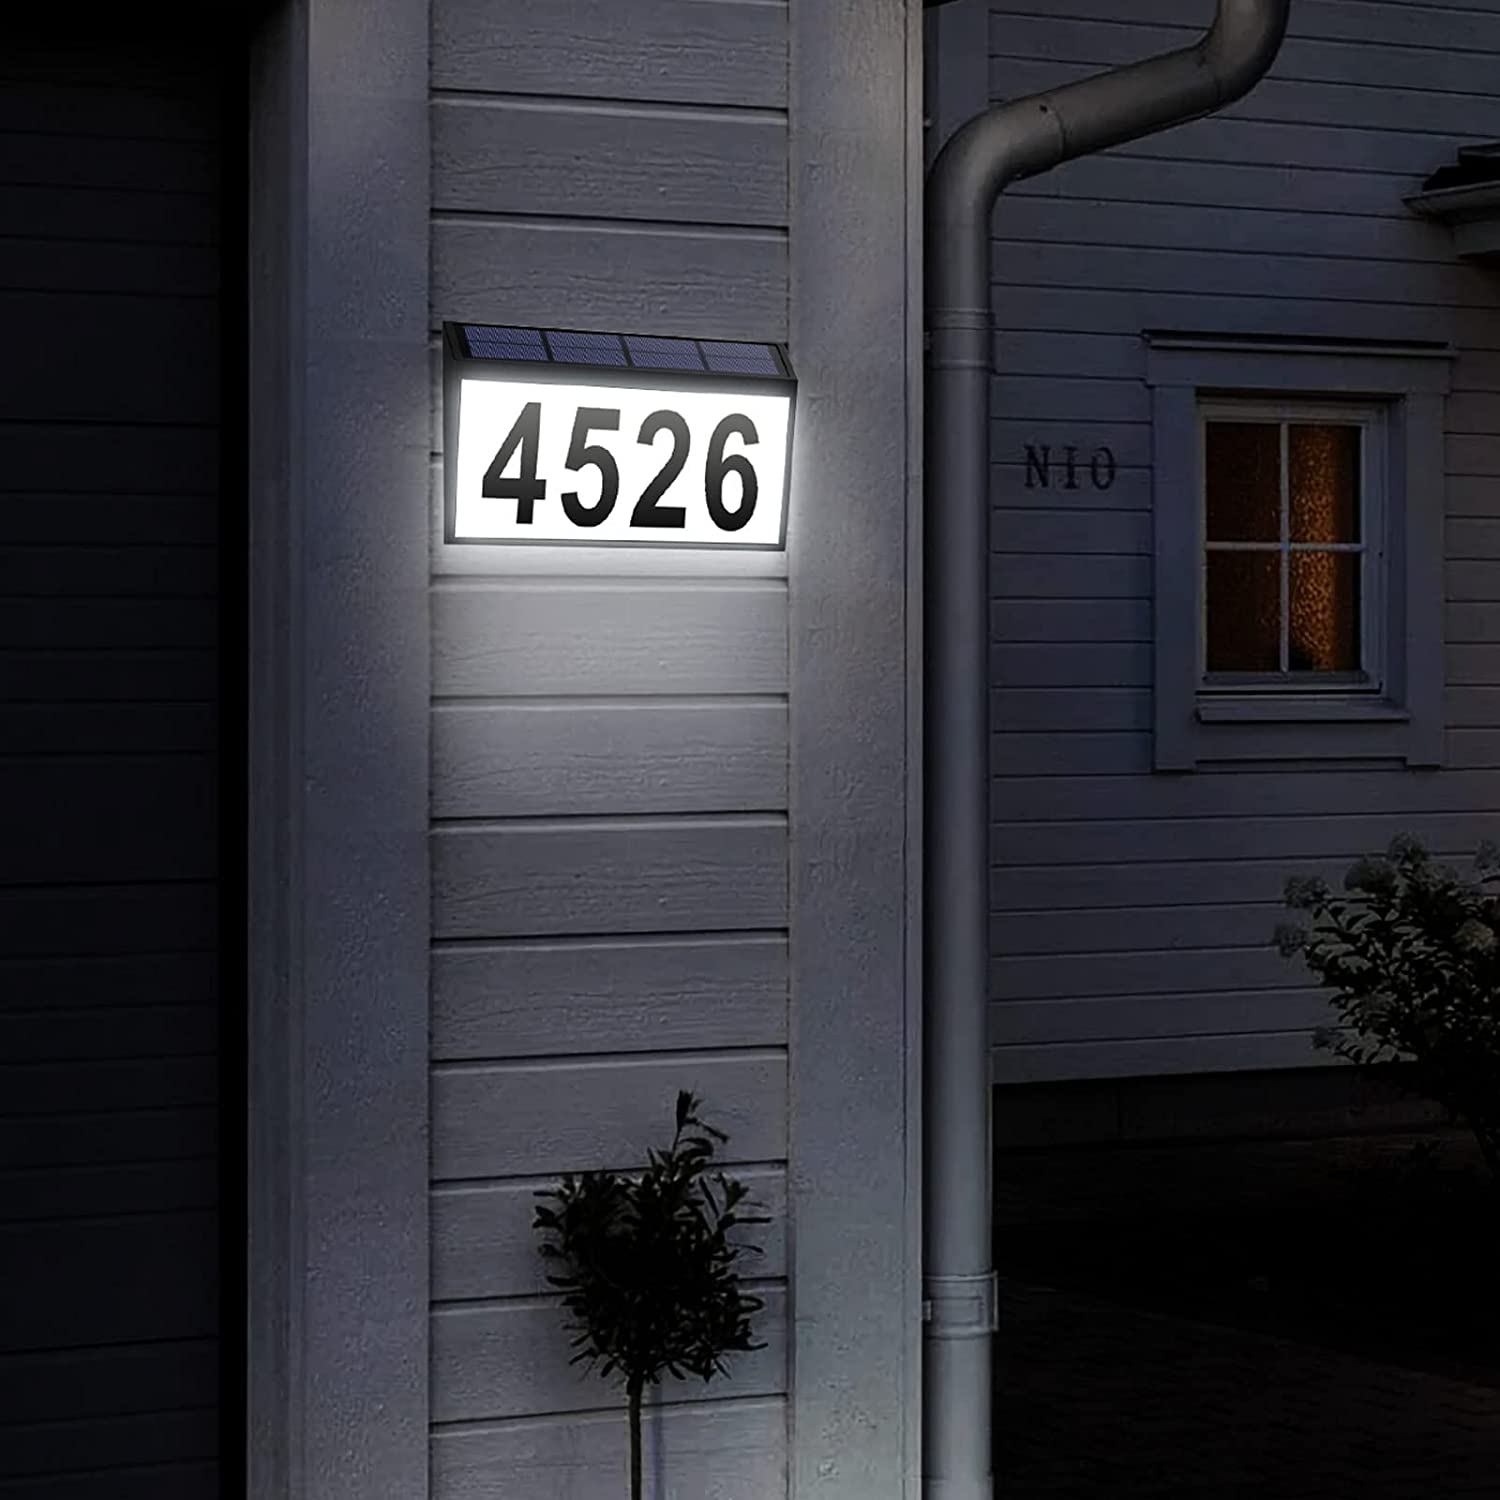 House Numbers Solar Powered, HomLxcIar house Numbers for Outside LED Lighted Address Numbers for House, Address Plaque Sign for Yard Outdoor Street Wall